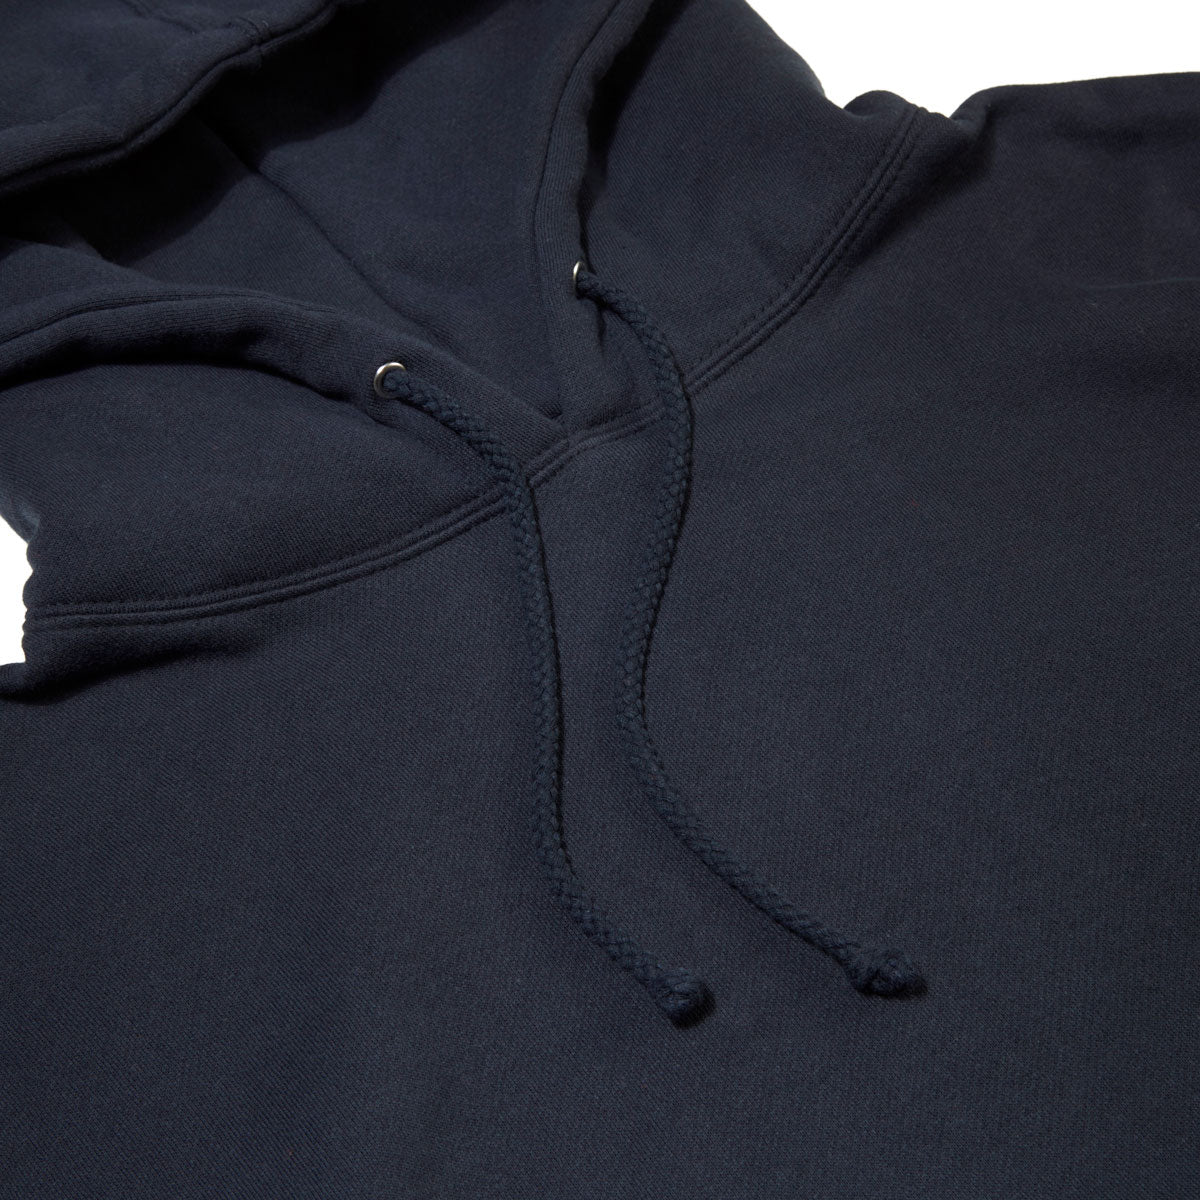 CCS Staple Pullover Hoodie - Navy image 2